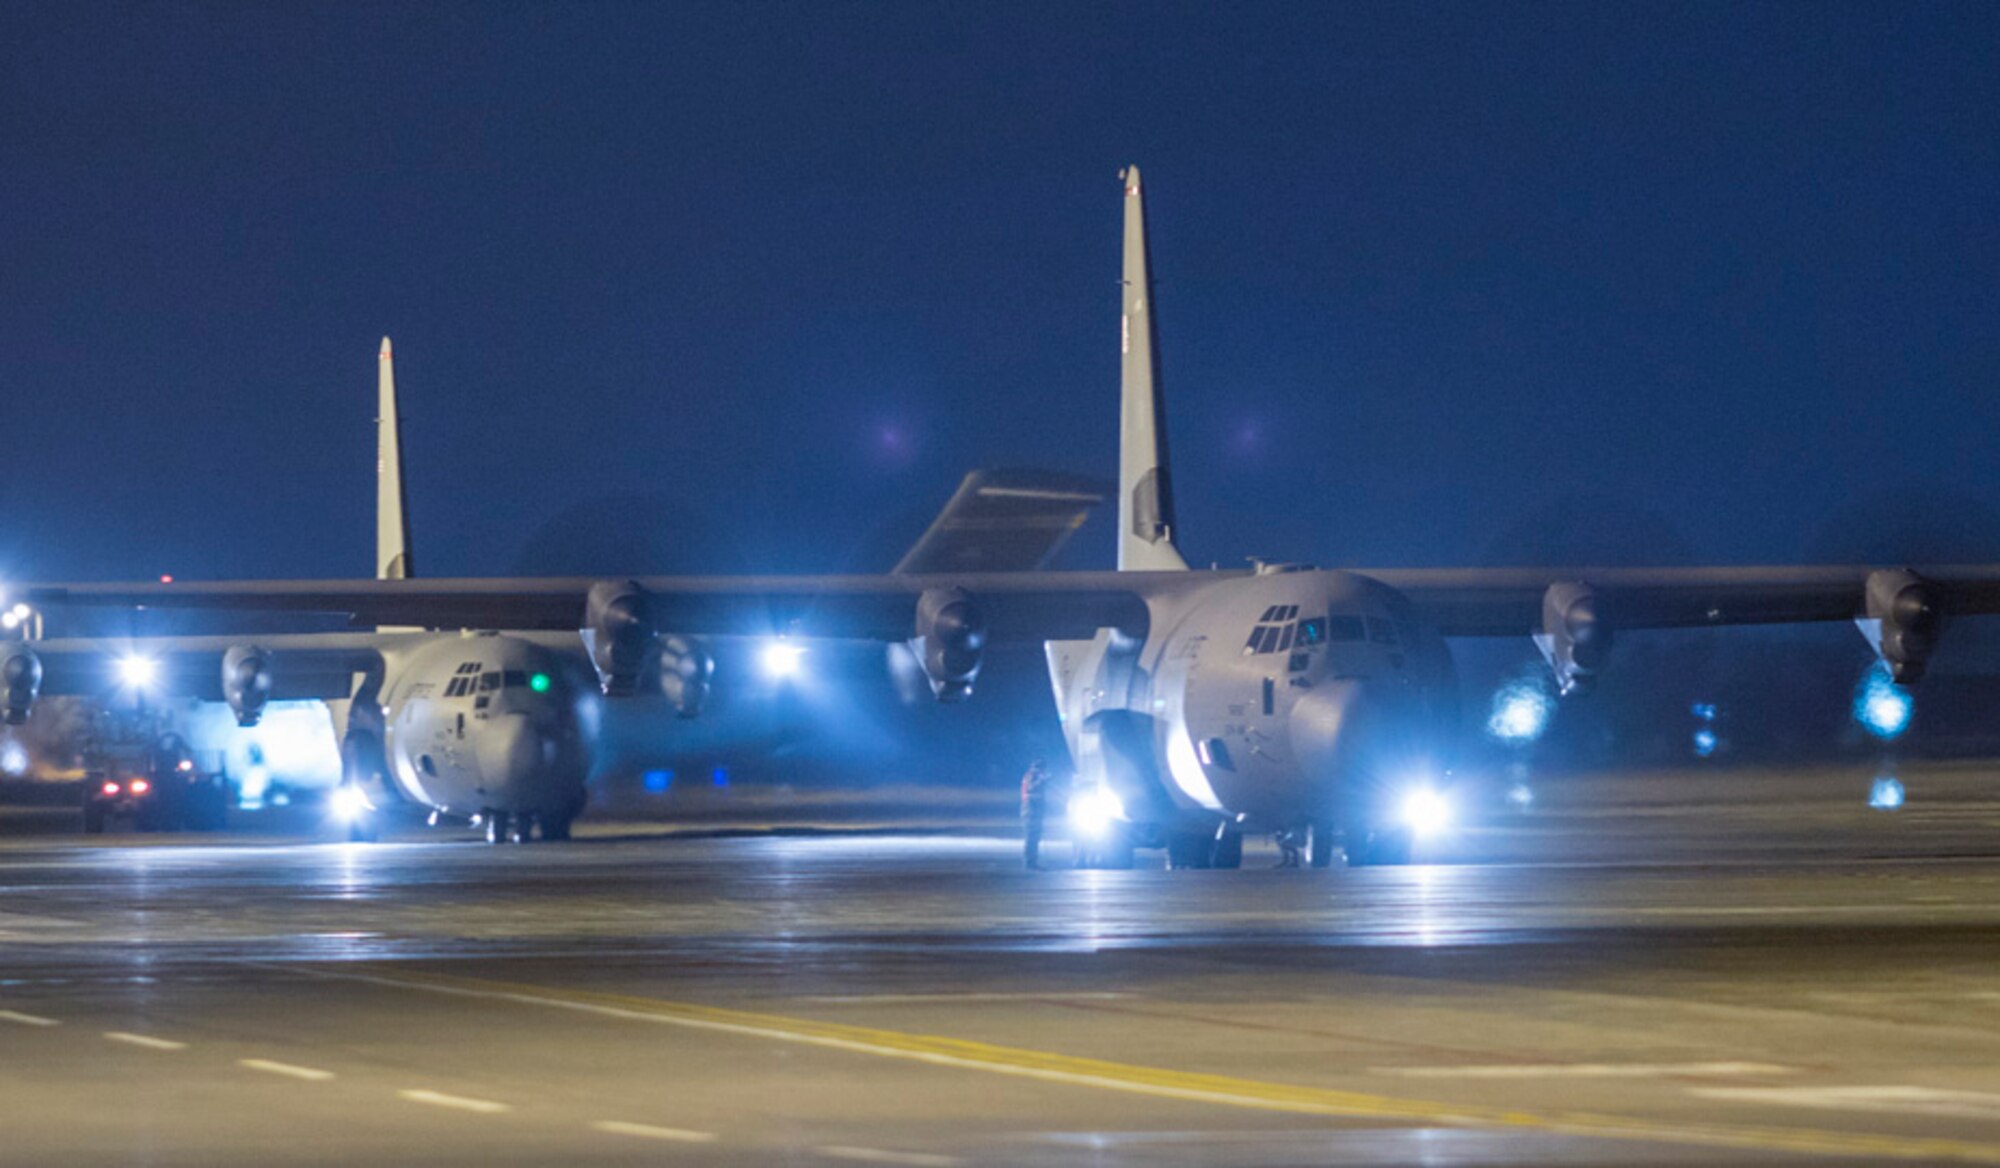 Airmen with the 374th Logistics Readiness Squadron combat mobility flight offload cargo from a C-130J Super Hercules